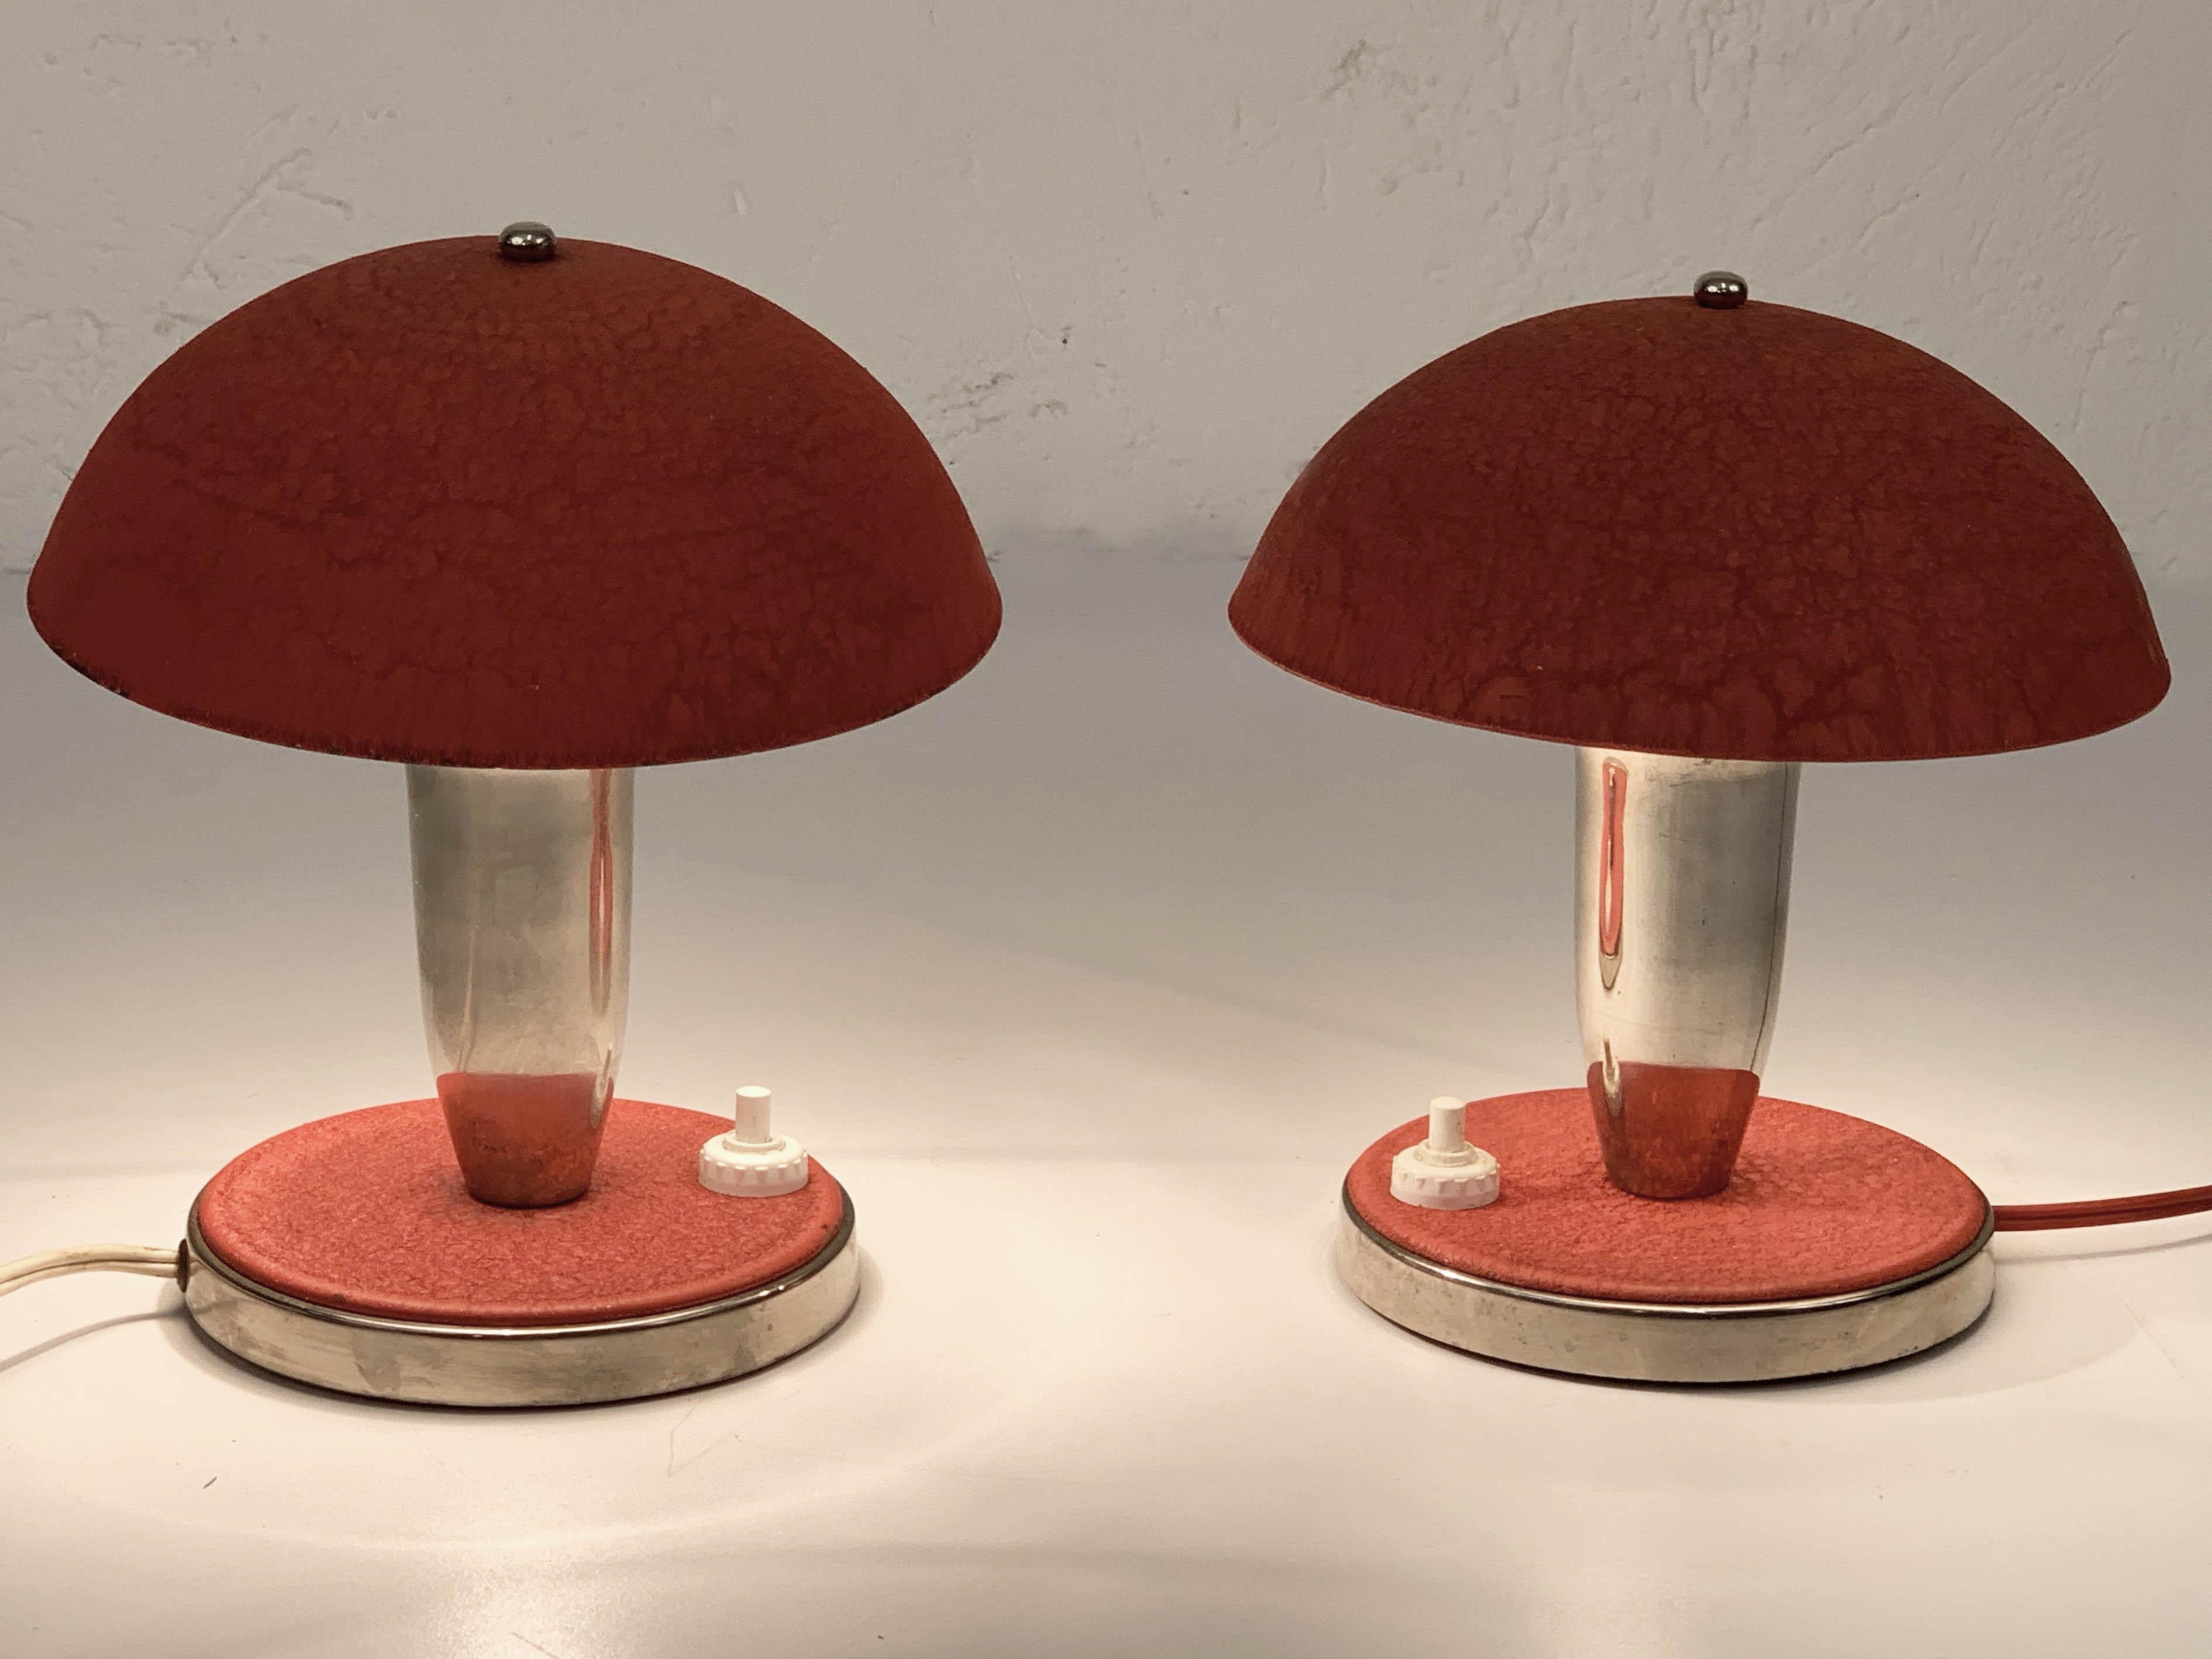 Pair of Bauhaus Red Metal and Aluminium Czech Table Lamps, 1930s For Sale 5